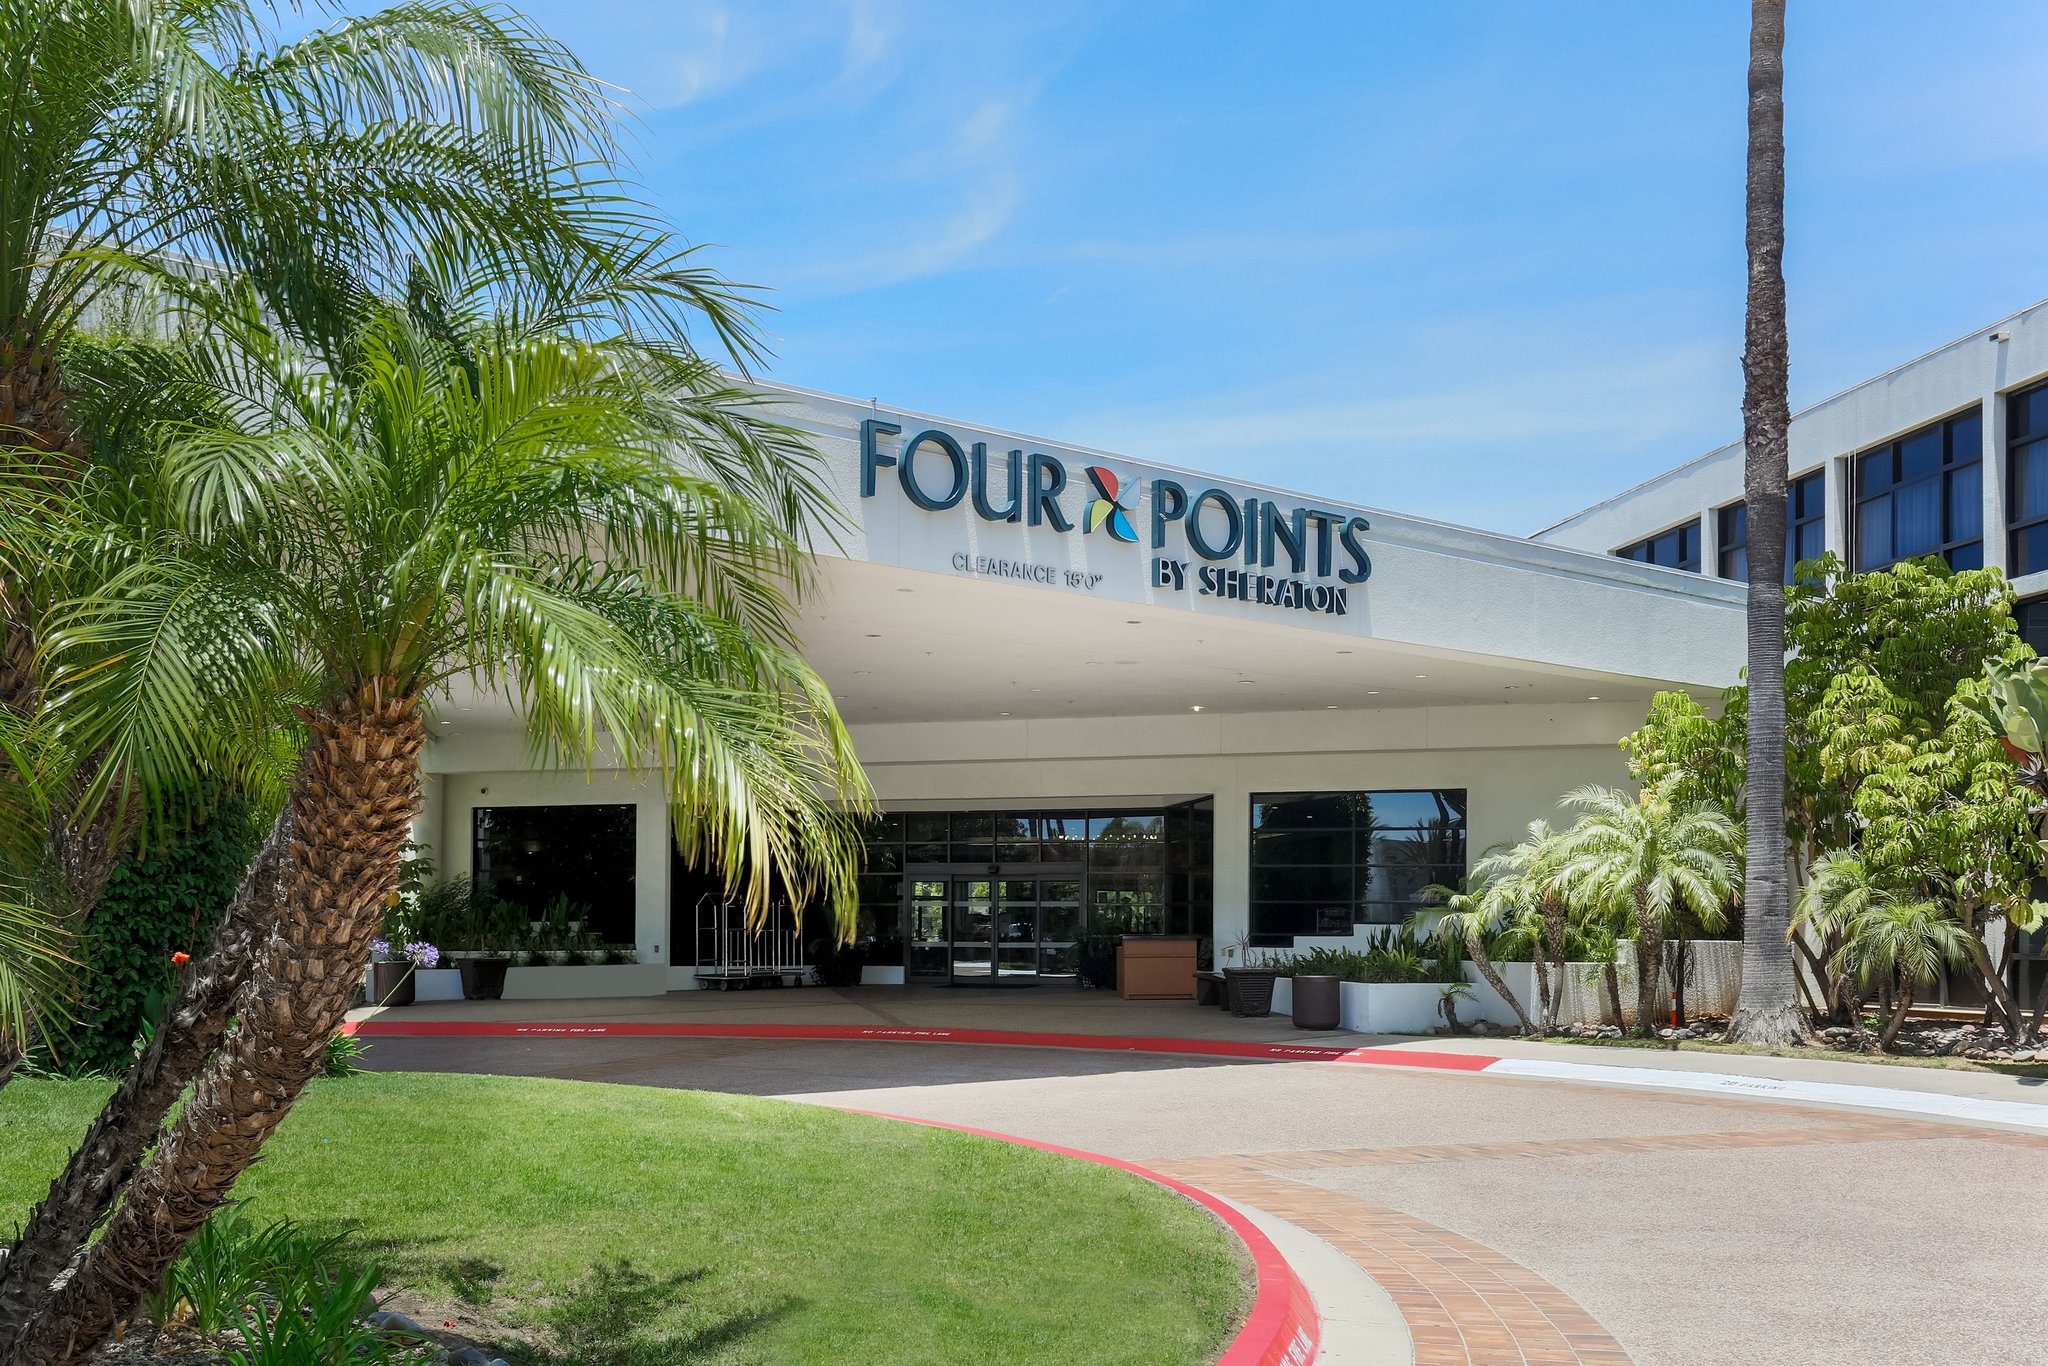 Meetings And Events At Four Points By Sheraton San Diego San Diego Ca Us